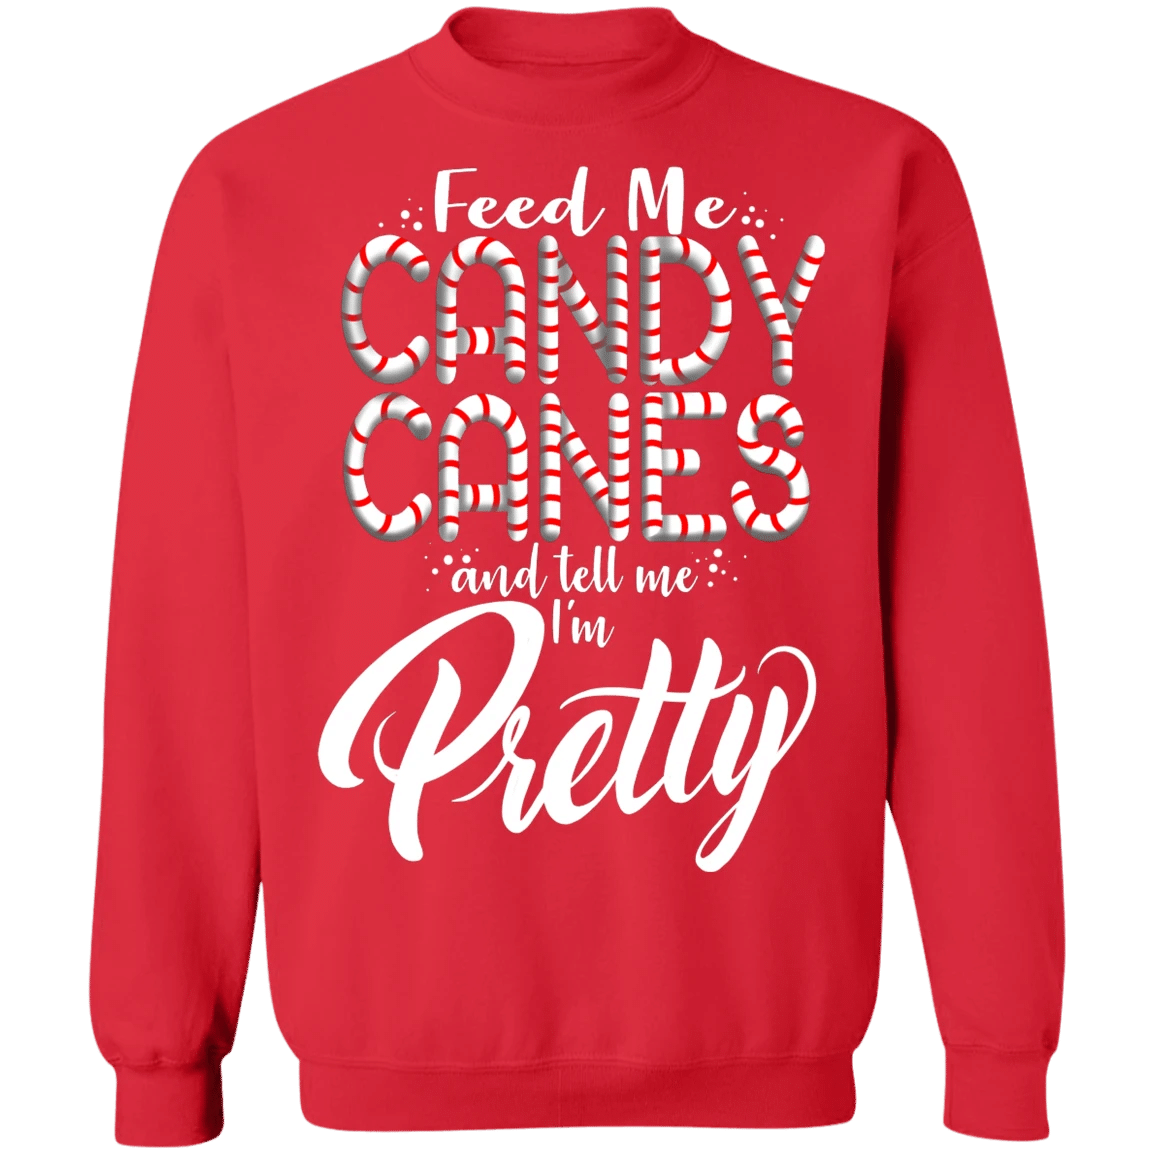 Feed Me Candy Canes And Tell Me I'm Pretty Christmas Sweatshirt Style: Sweatshirt, Color: Red